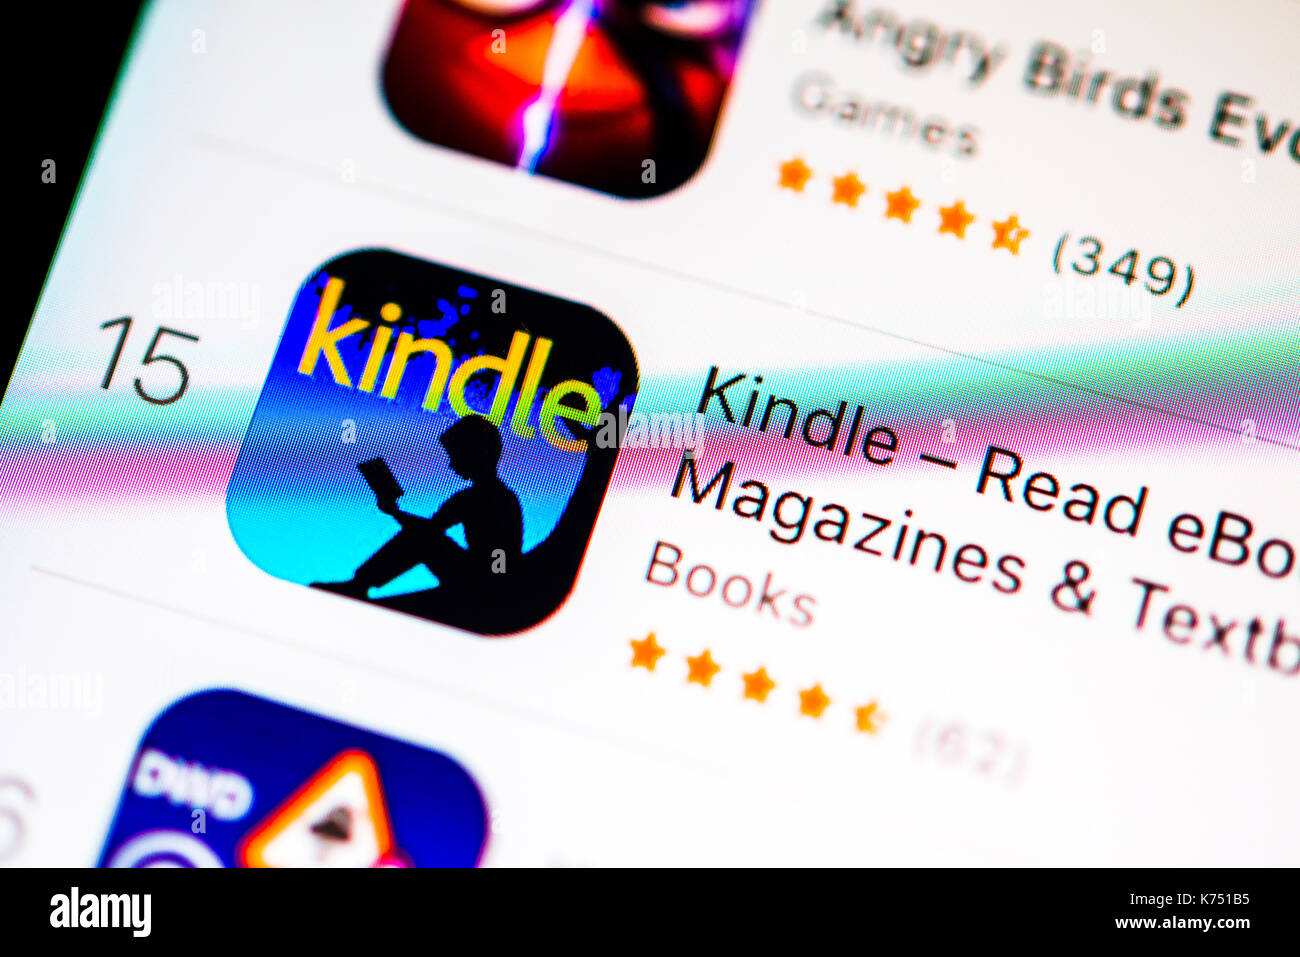 Amazon Kindle App in the Apple App Store, e-Books, display on a screen of a mobile phone, iPhone, iOS, smartphone Stock Photo